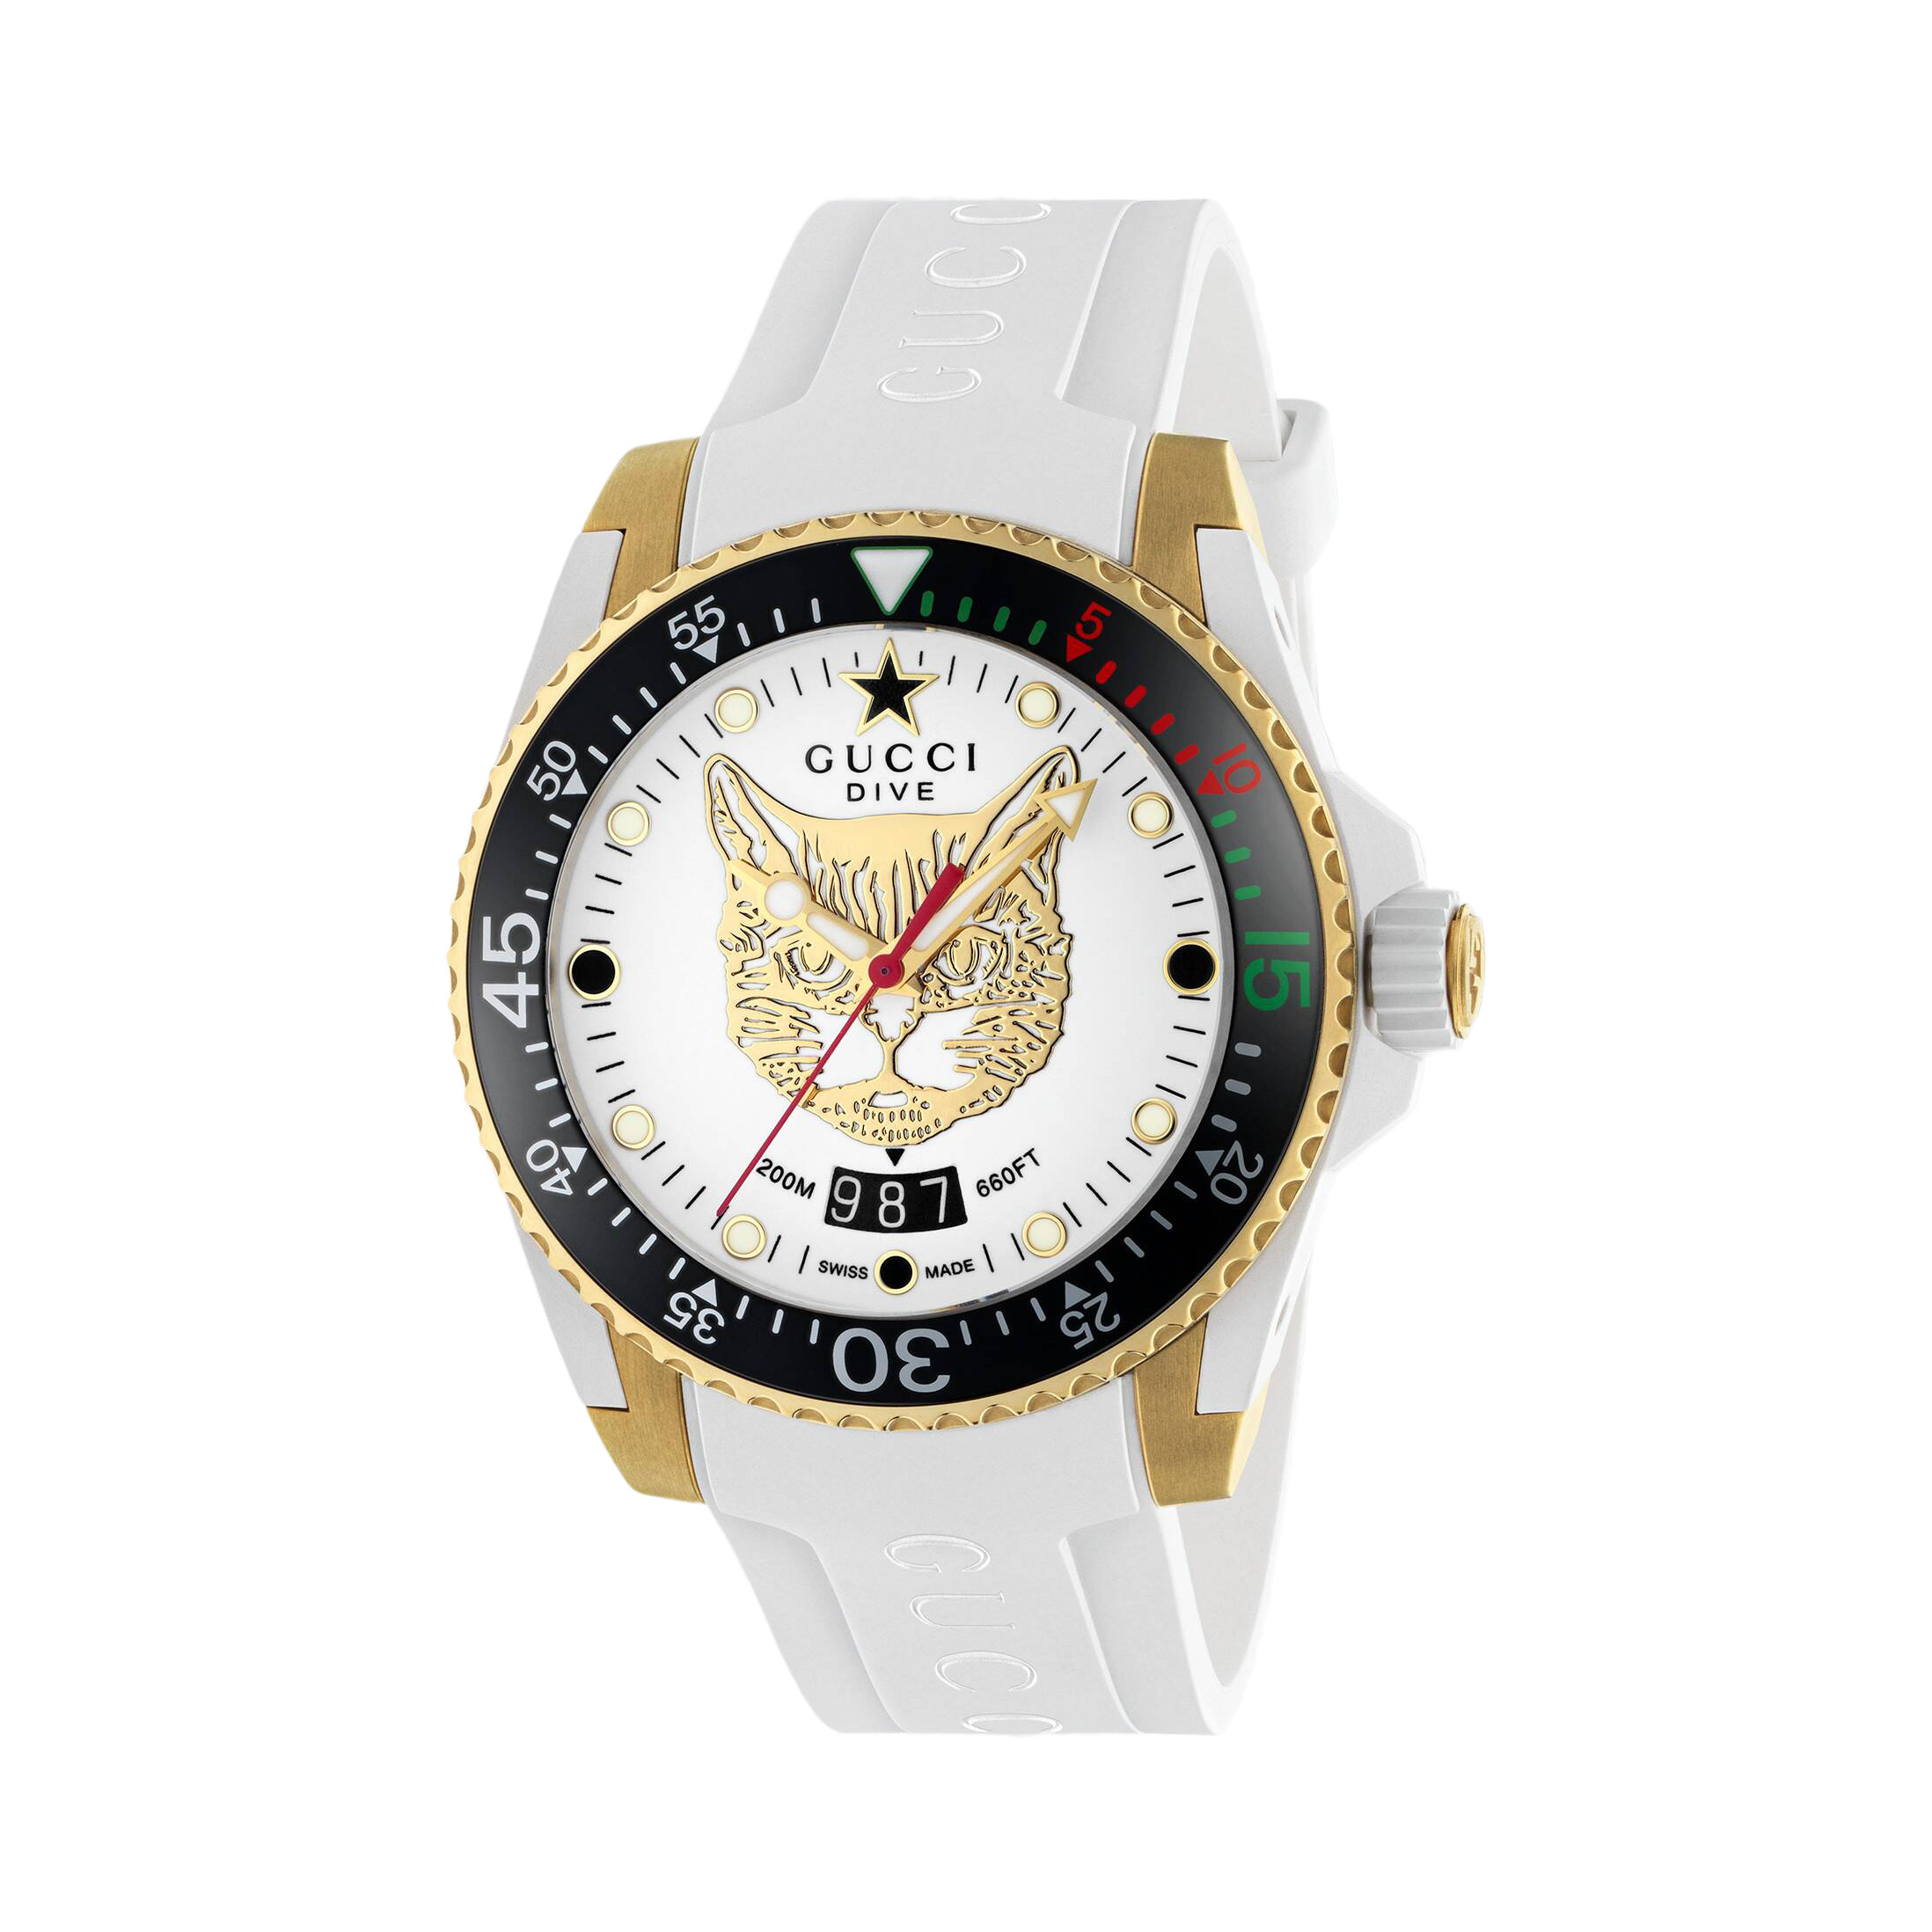 Gucci Dive 559821 I8610 8504 - 40mm in Steel/Yellow Gold - US